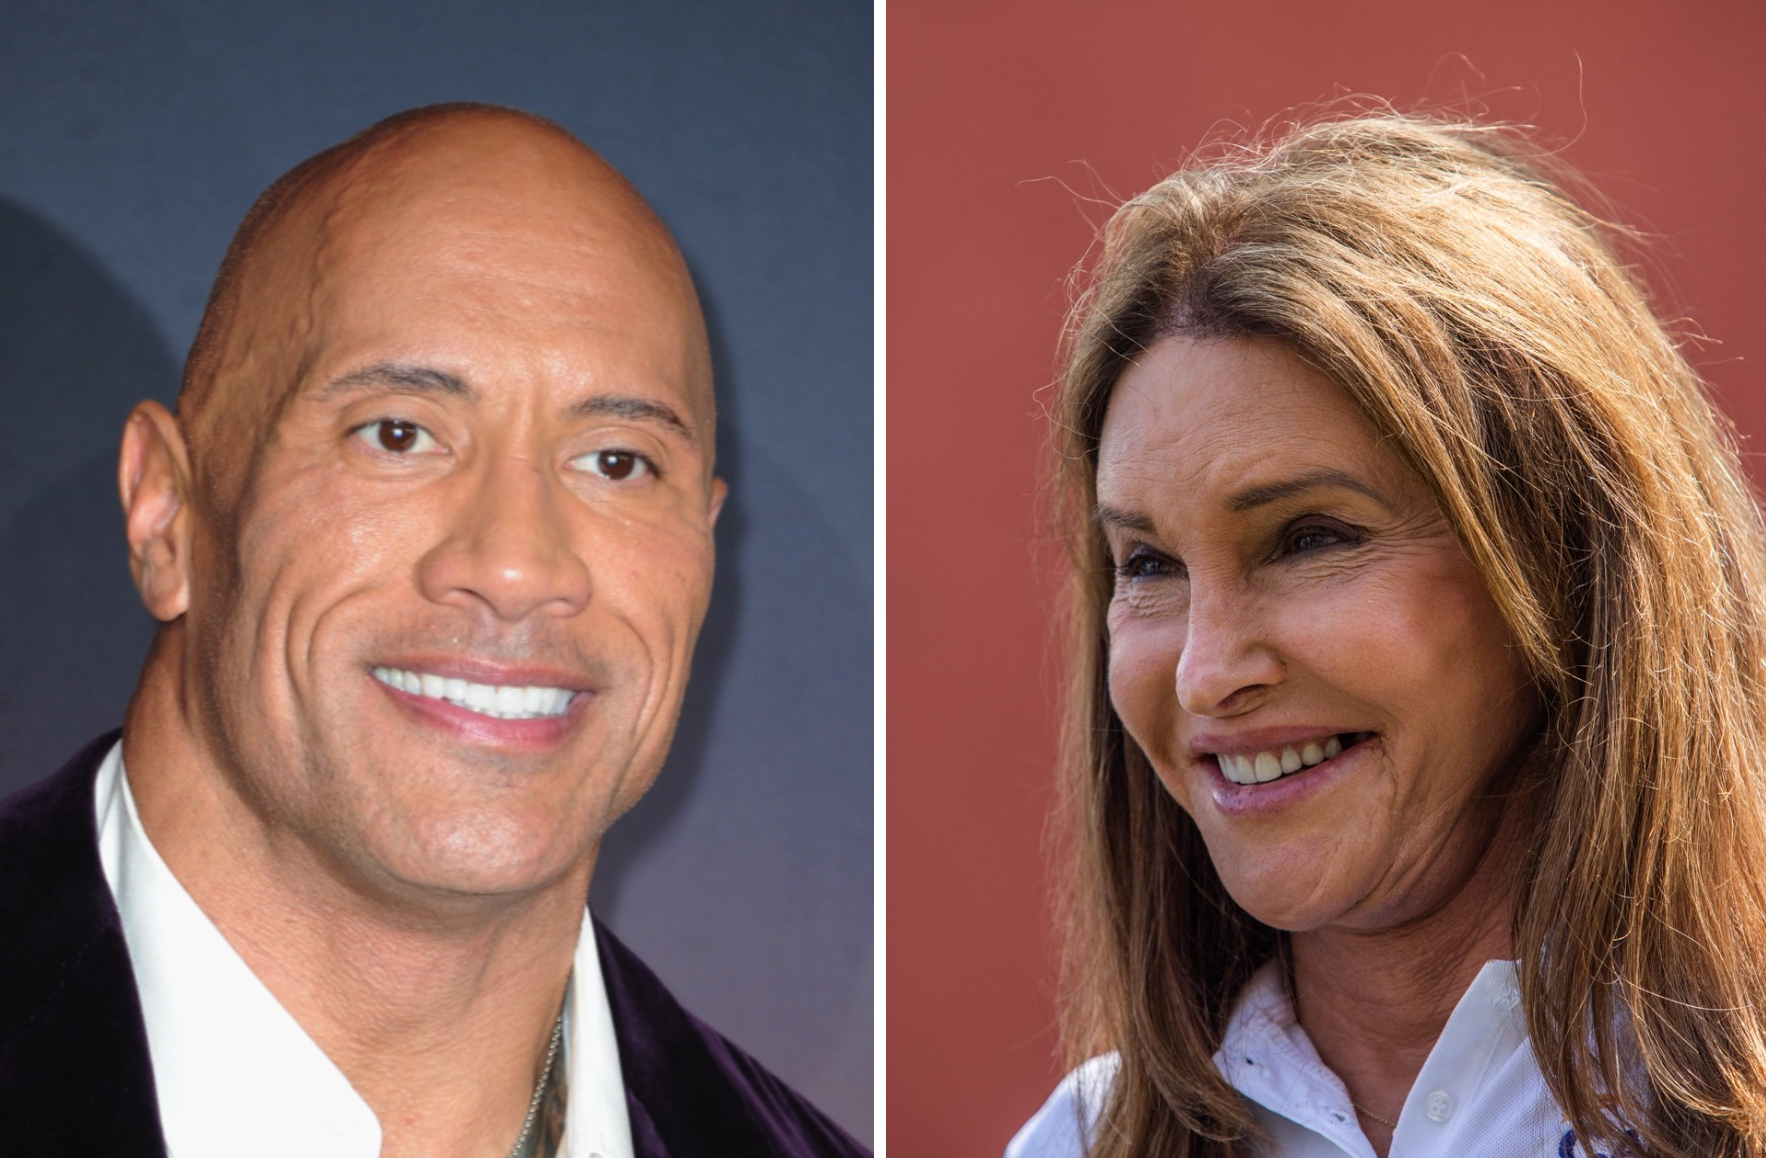 Caitlyn Jenner Hits Out At Dwayne Johnson Over Past Transphobic Remarks